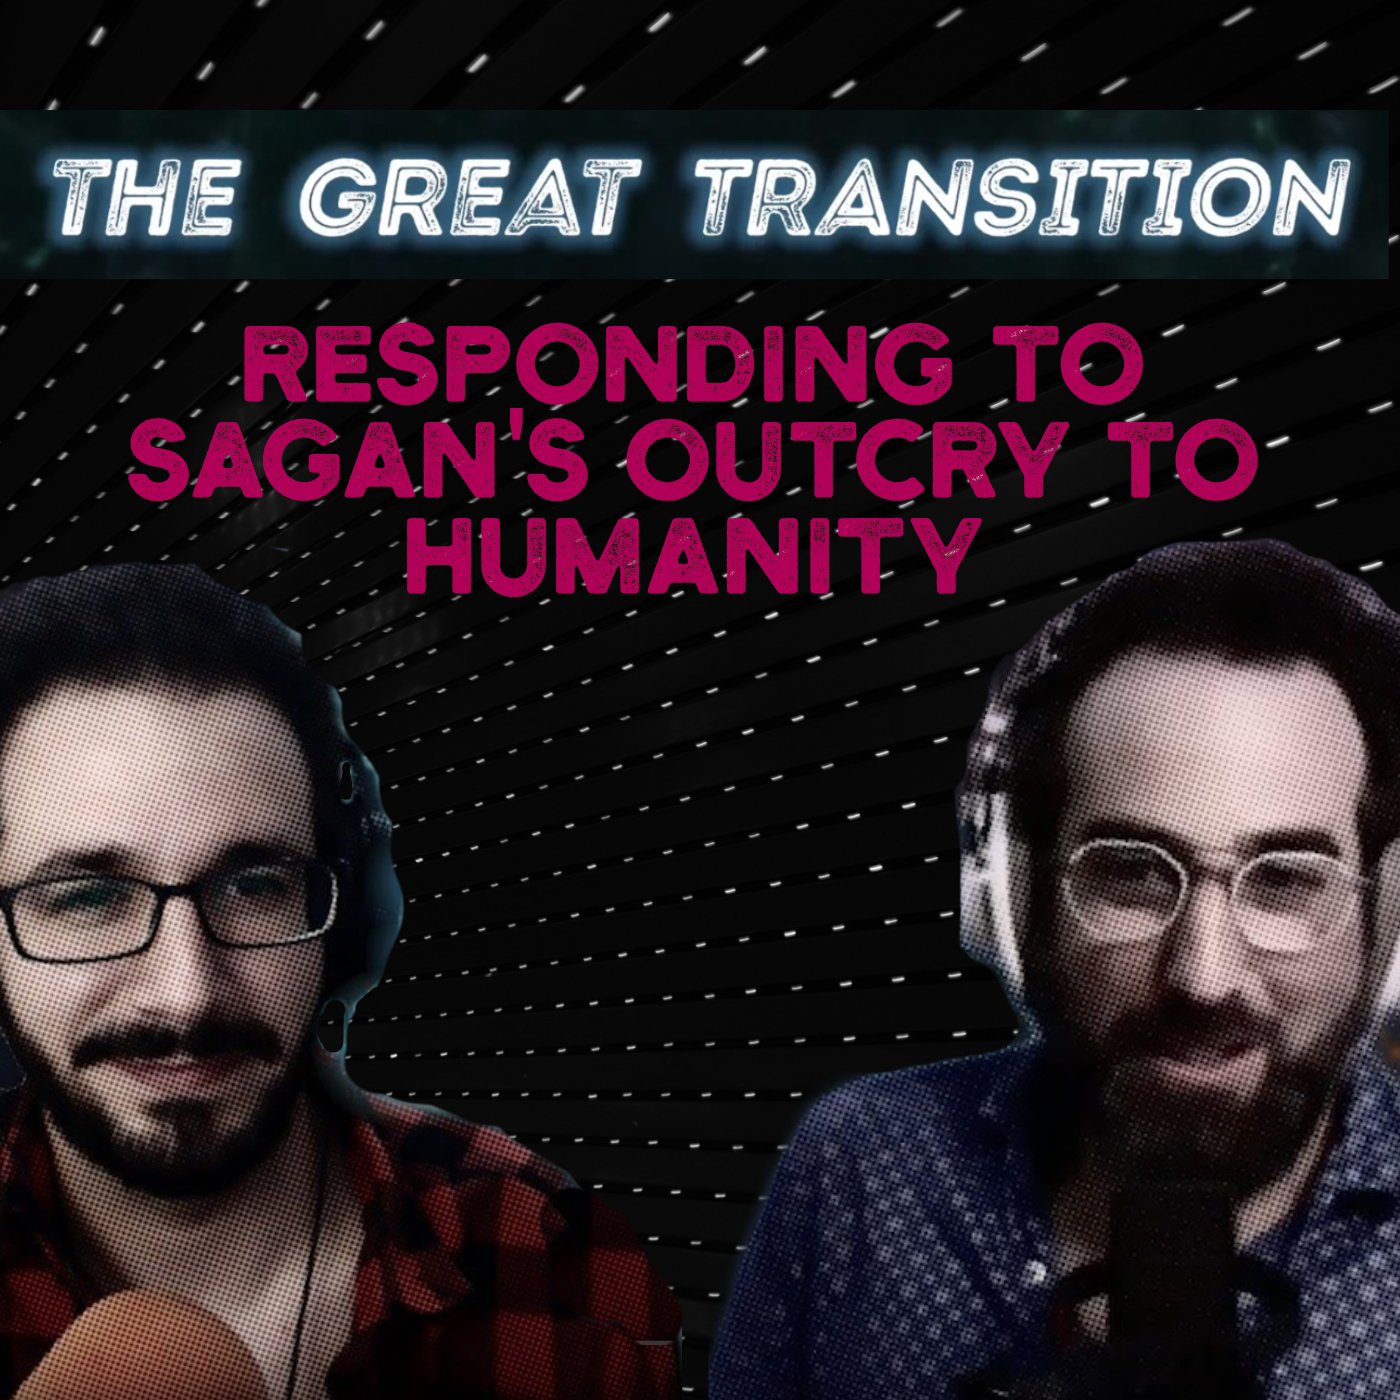 The Great Transition - Responding To Sagan's Outcry To Humanity